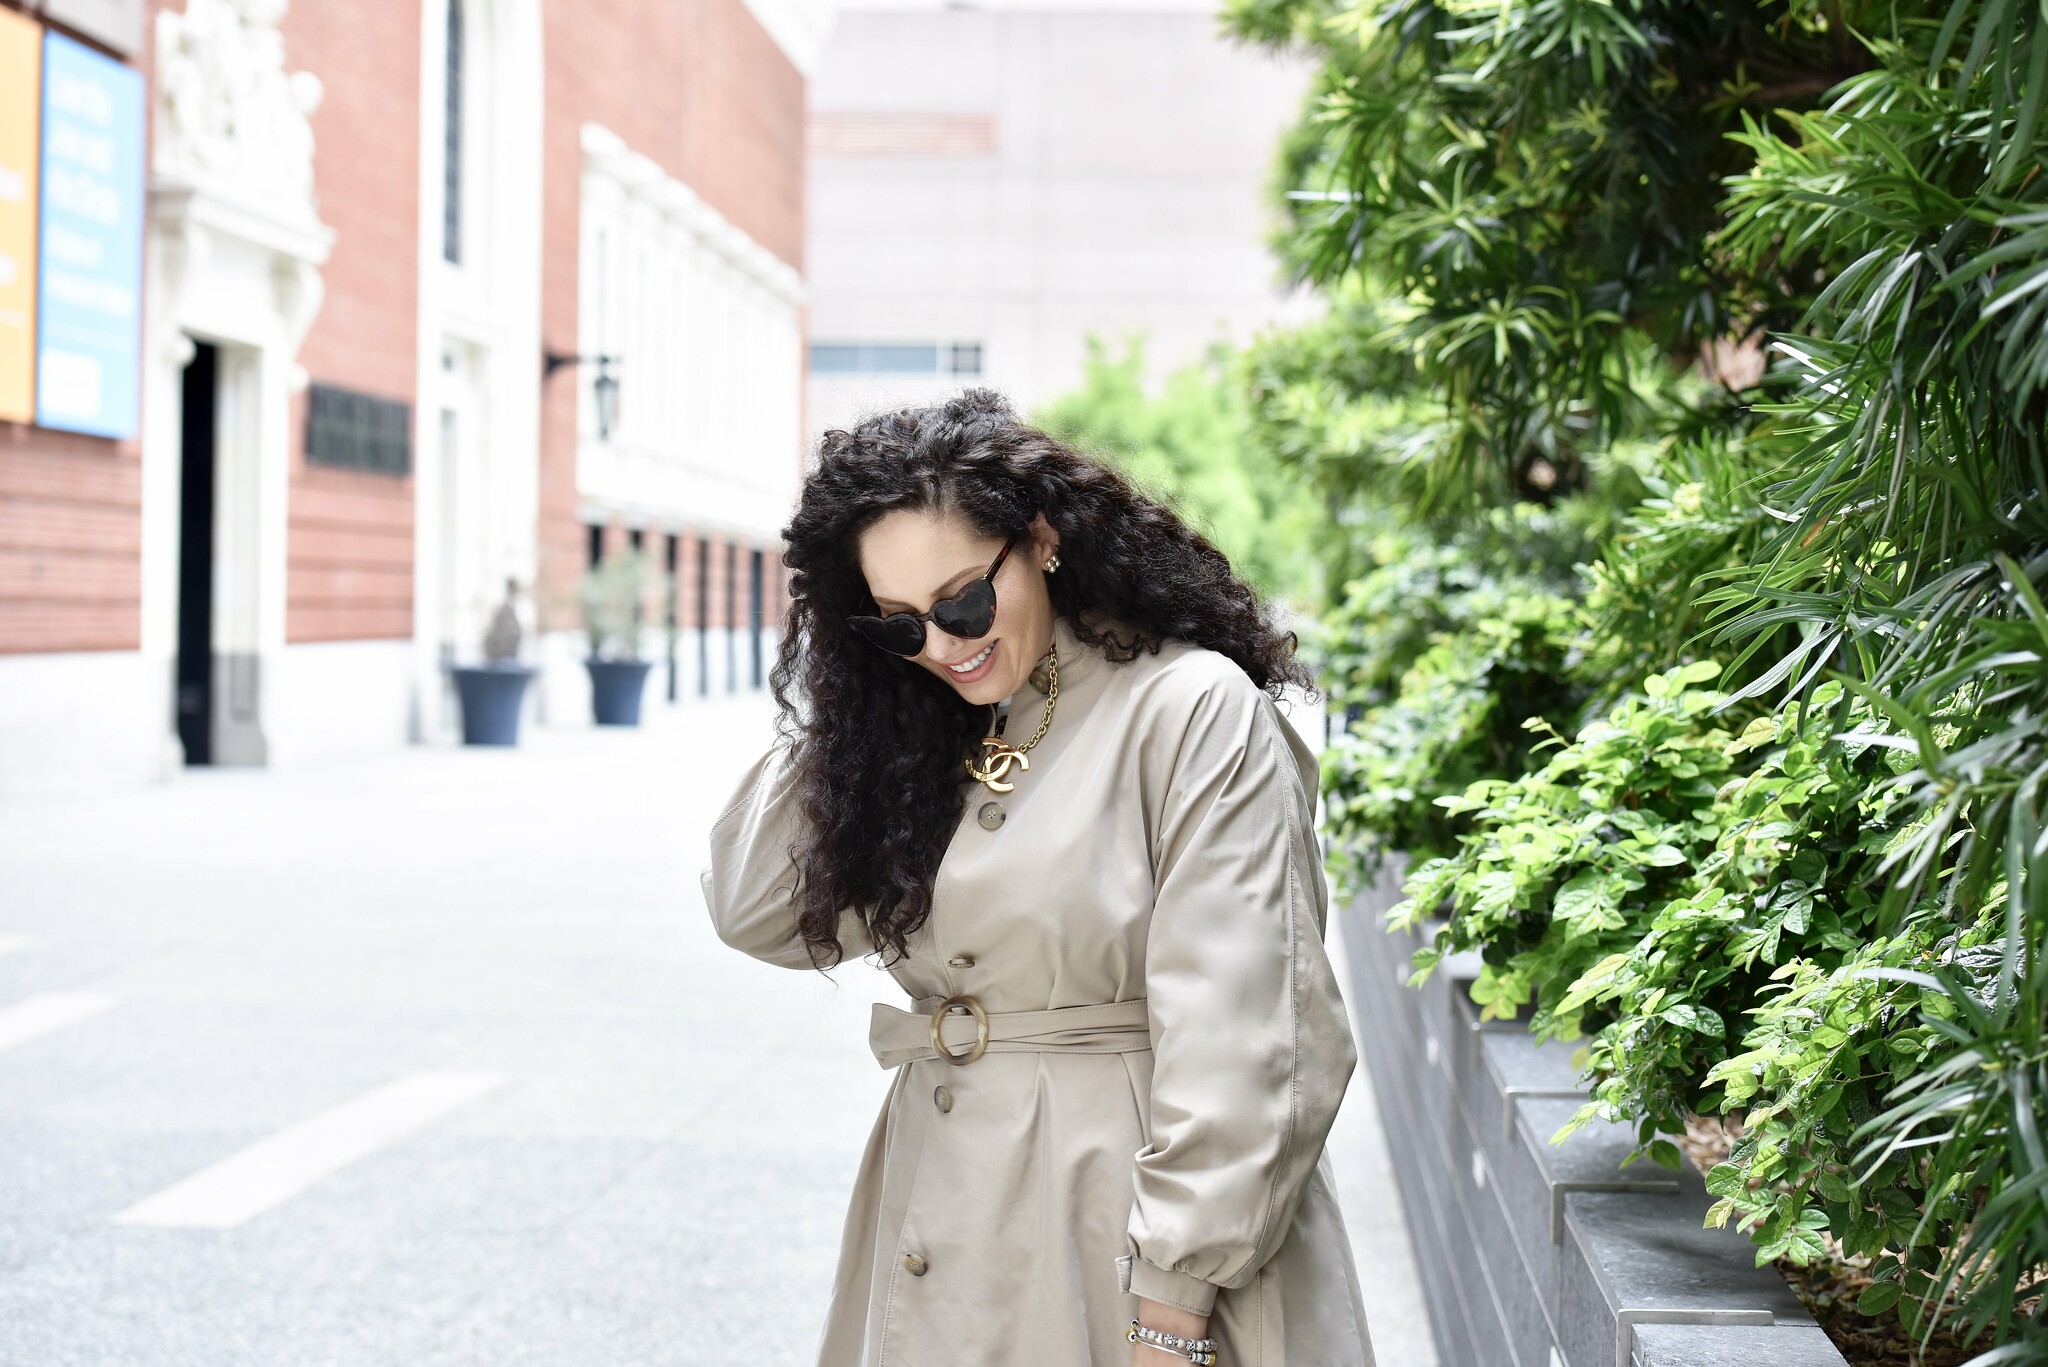 This Trench Is The Ultimate Wardrobe Essential Via @GirlWithCurves #outfits #style #trench #fashion